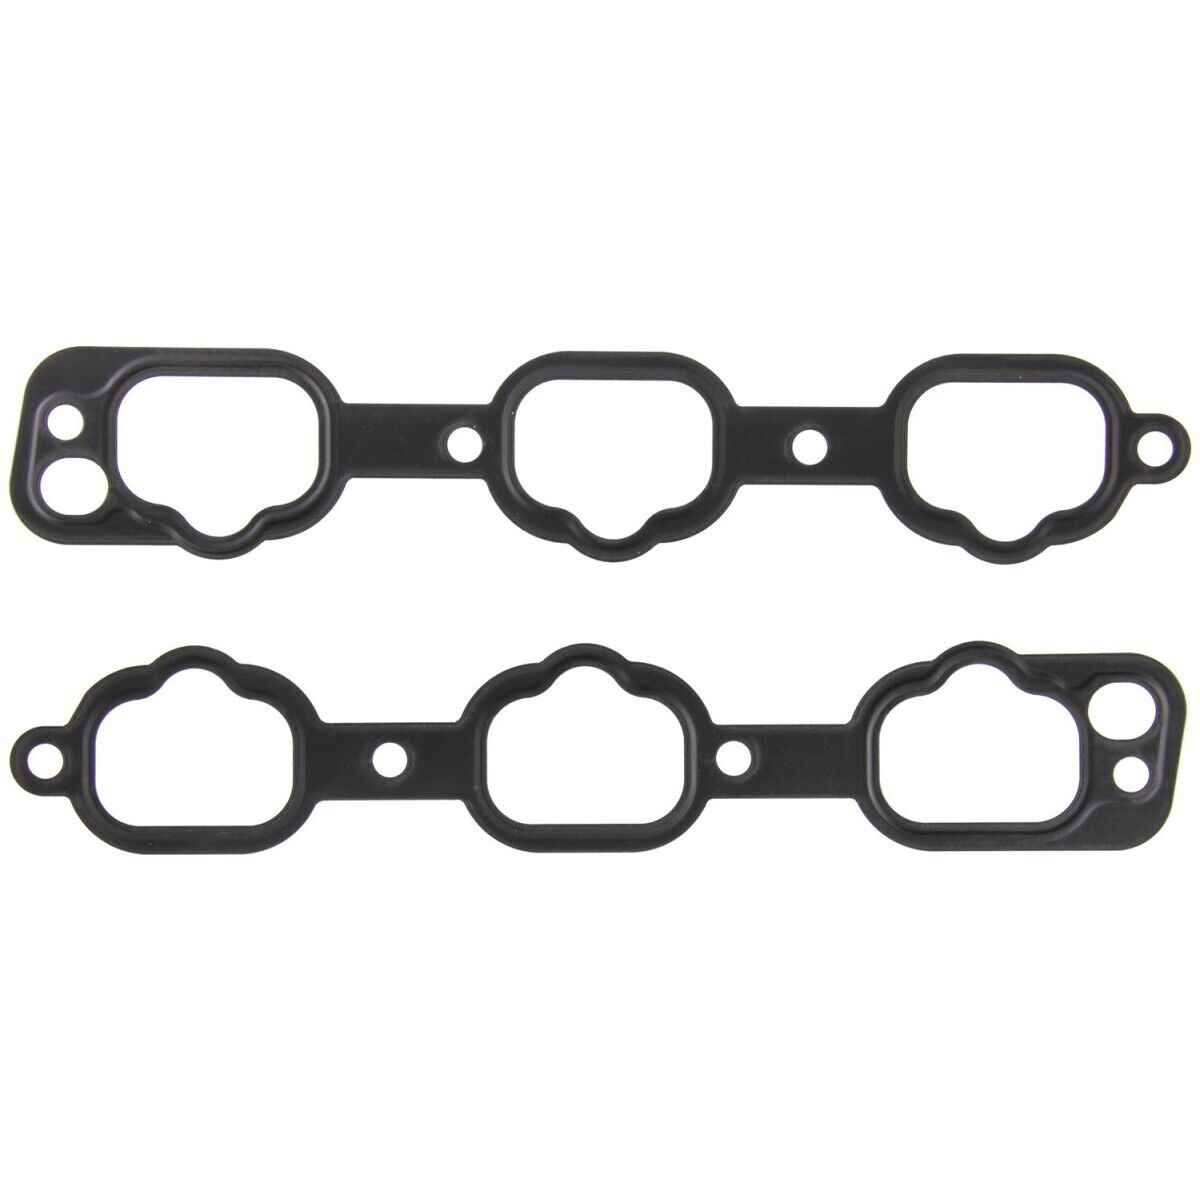 MS 97091 Felpro Intake Manifold Gaskets 2-piece set Lower for Mercedes C Class E